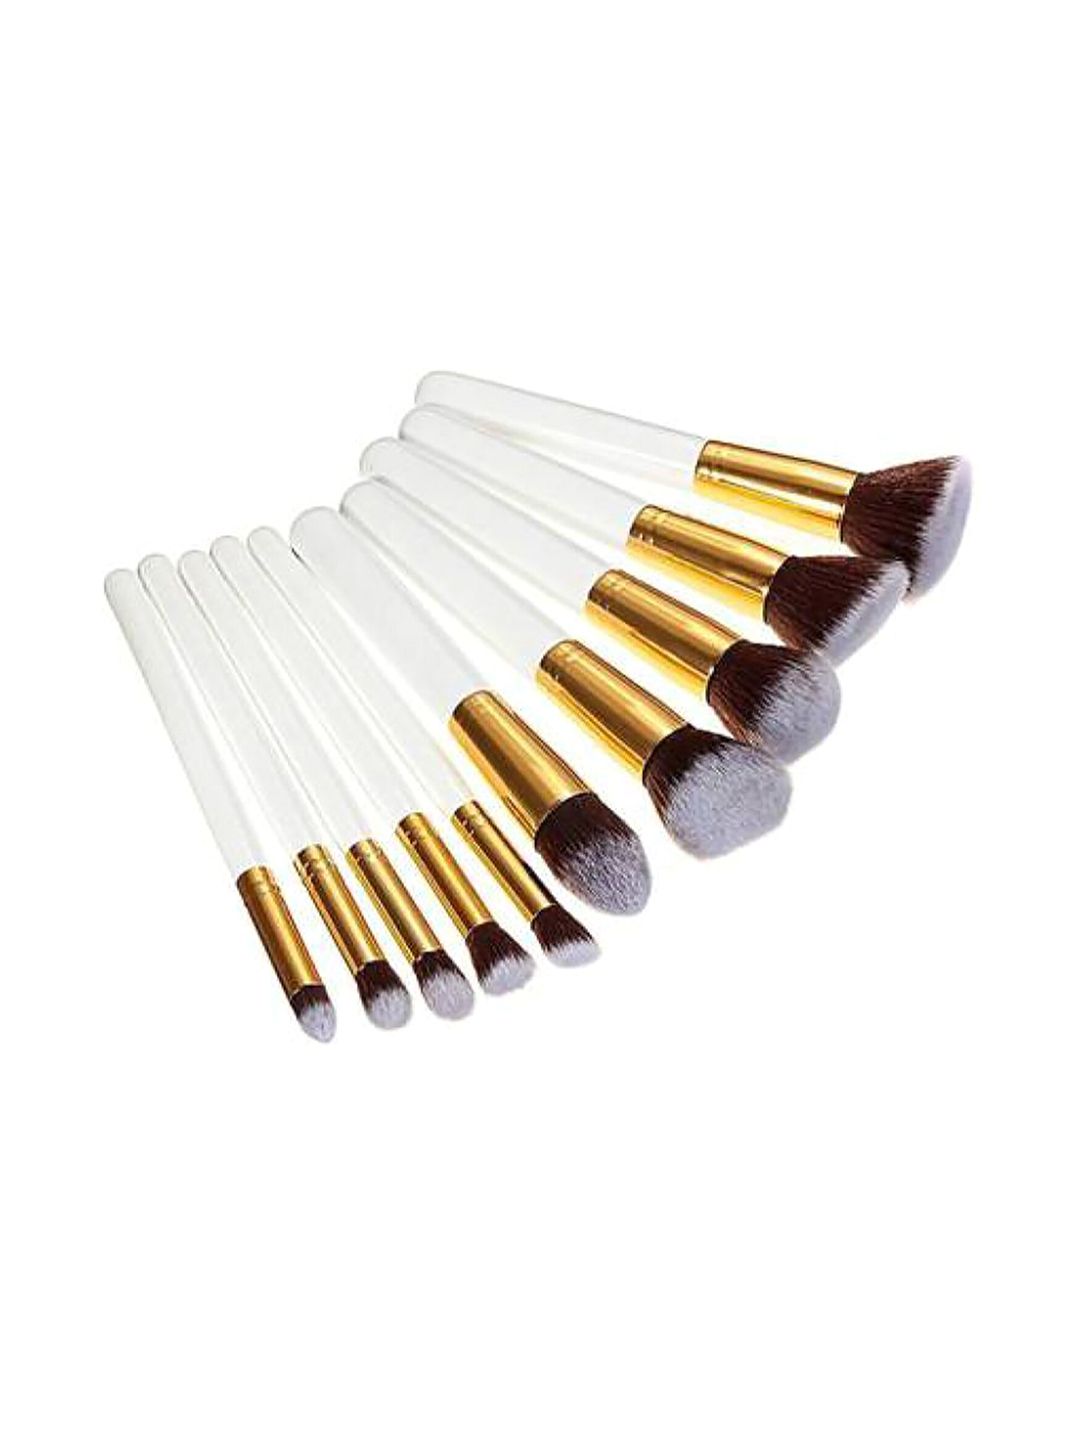 Ronzille Set of 10 White Makeup Brushes Price in India